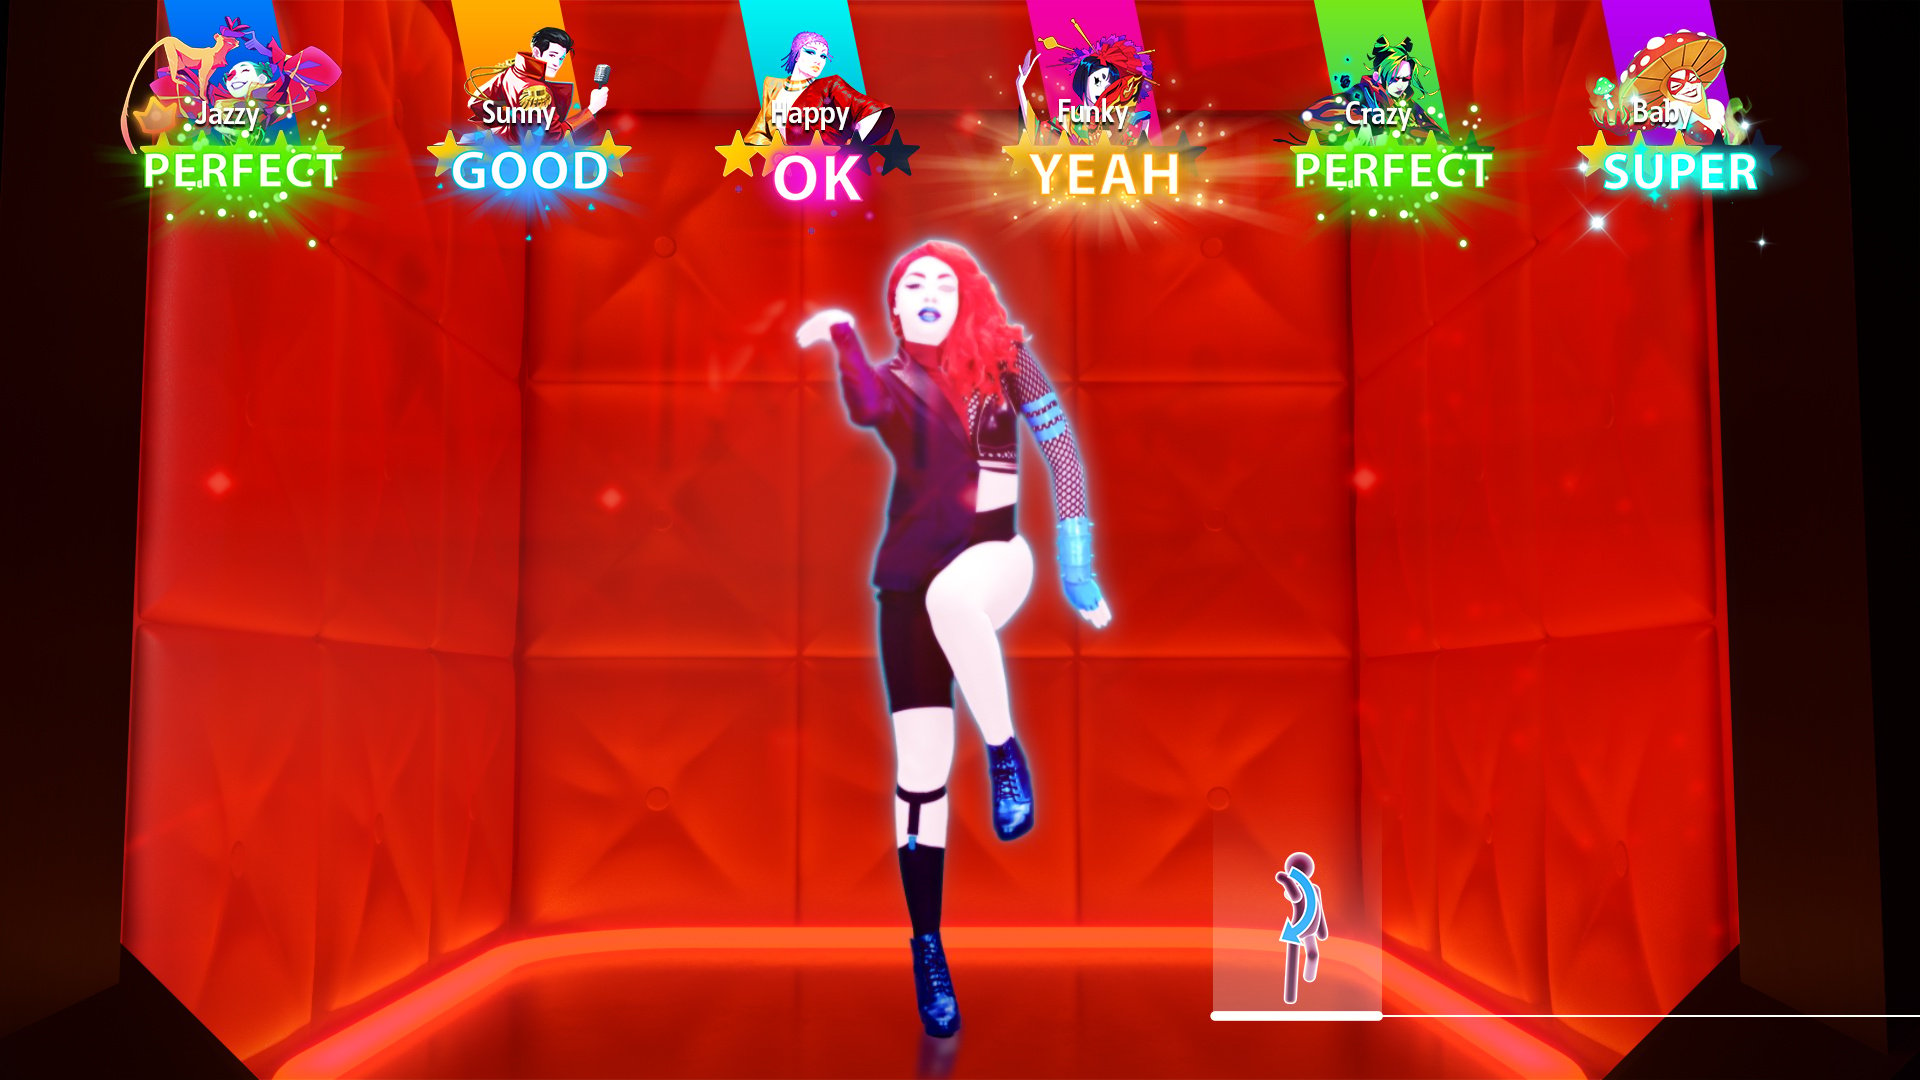 Just Dance 2023 Review